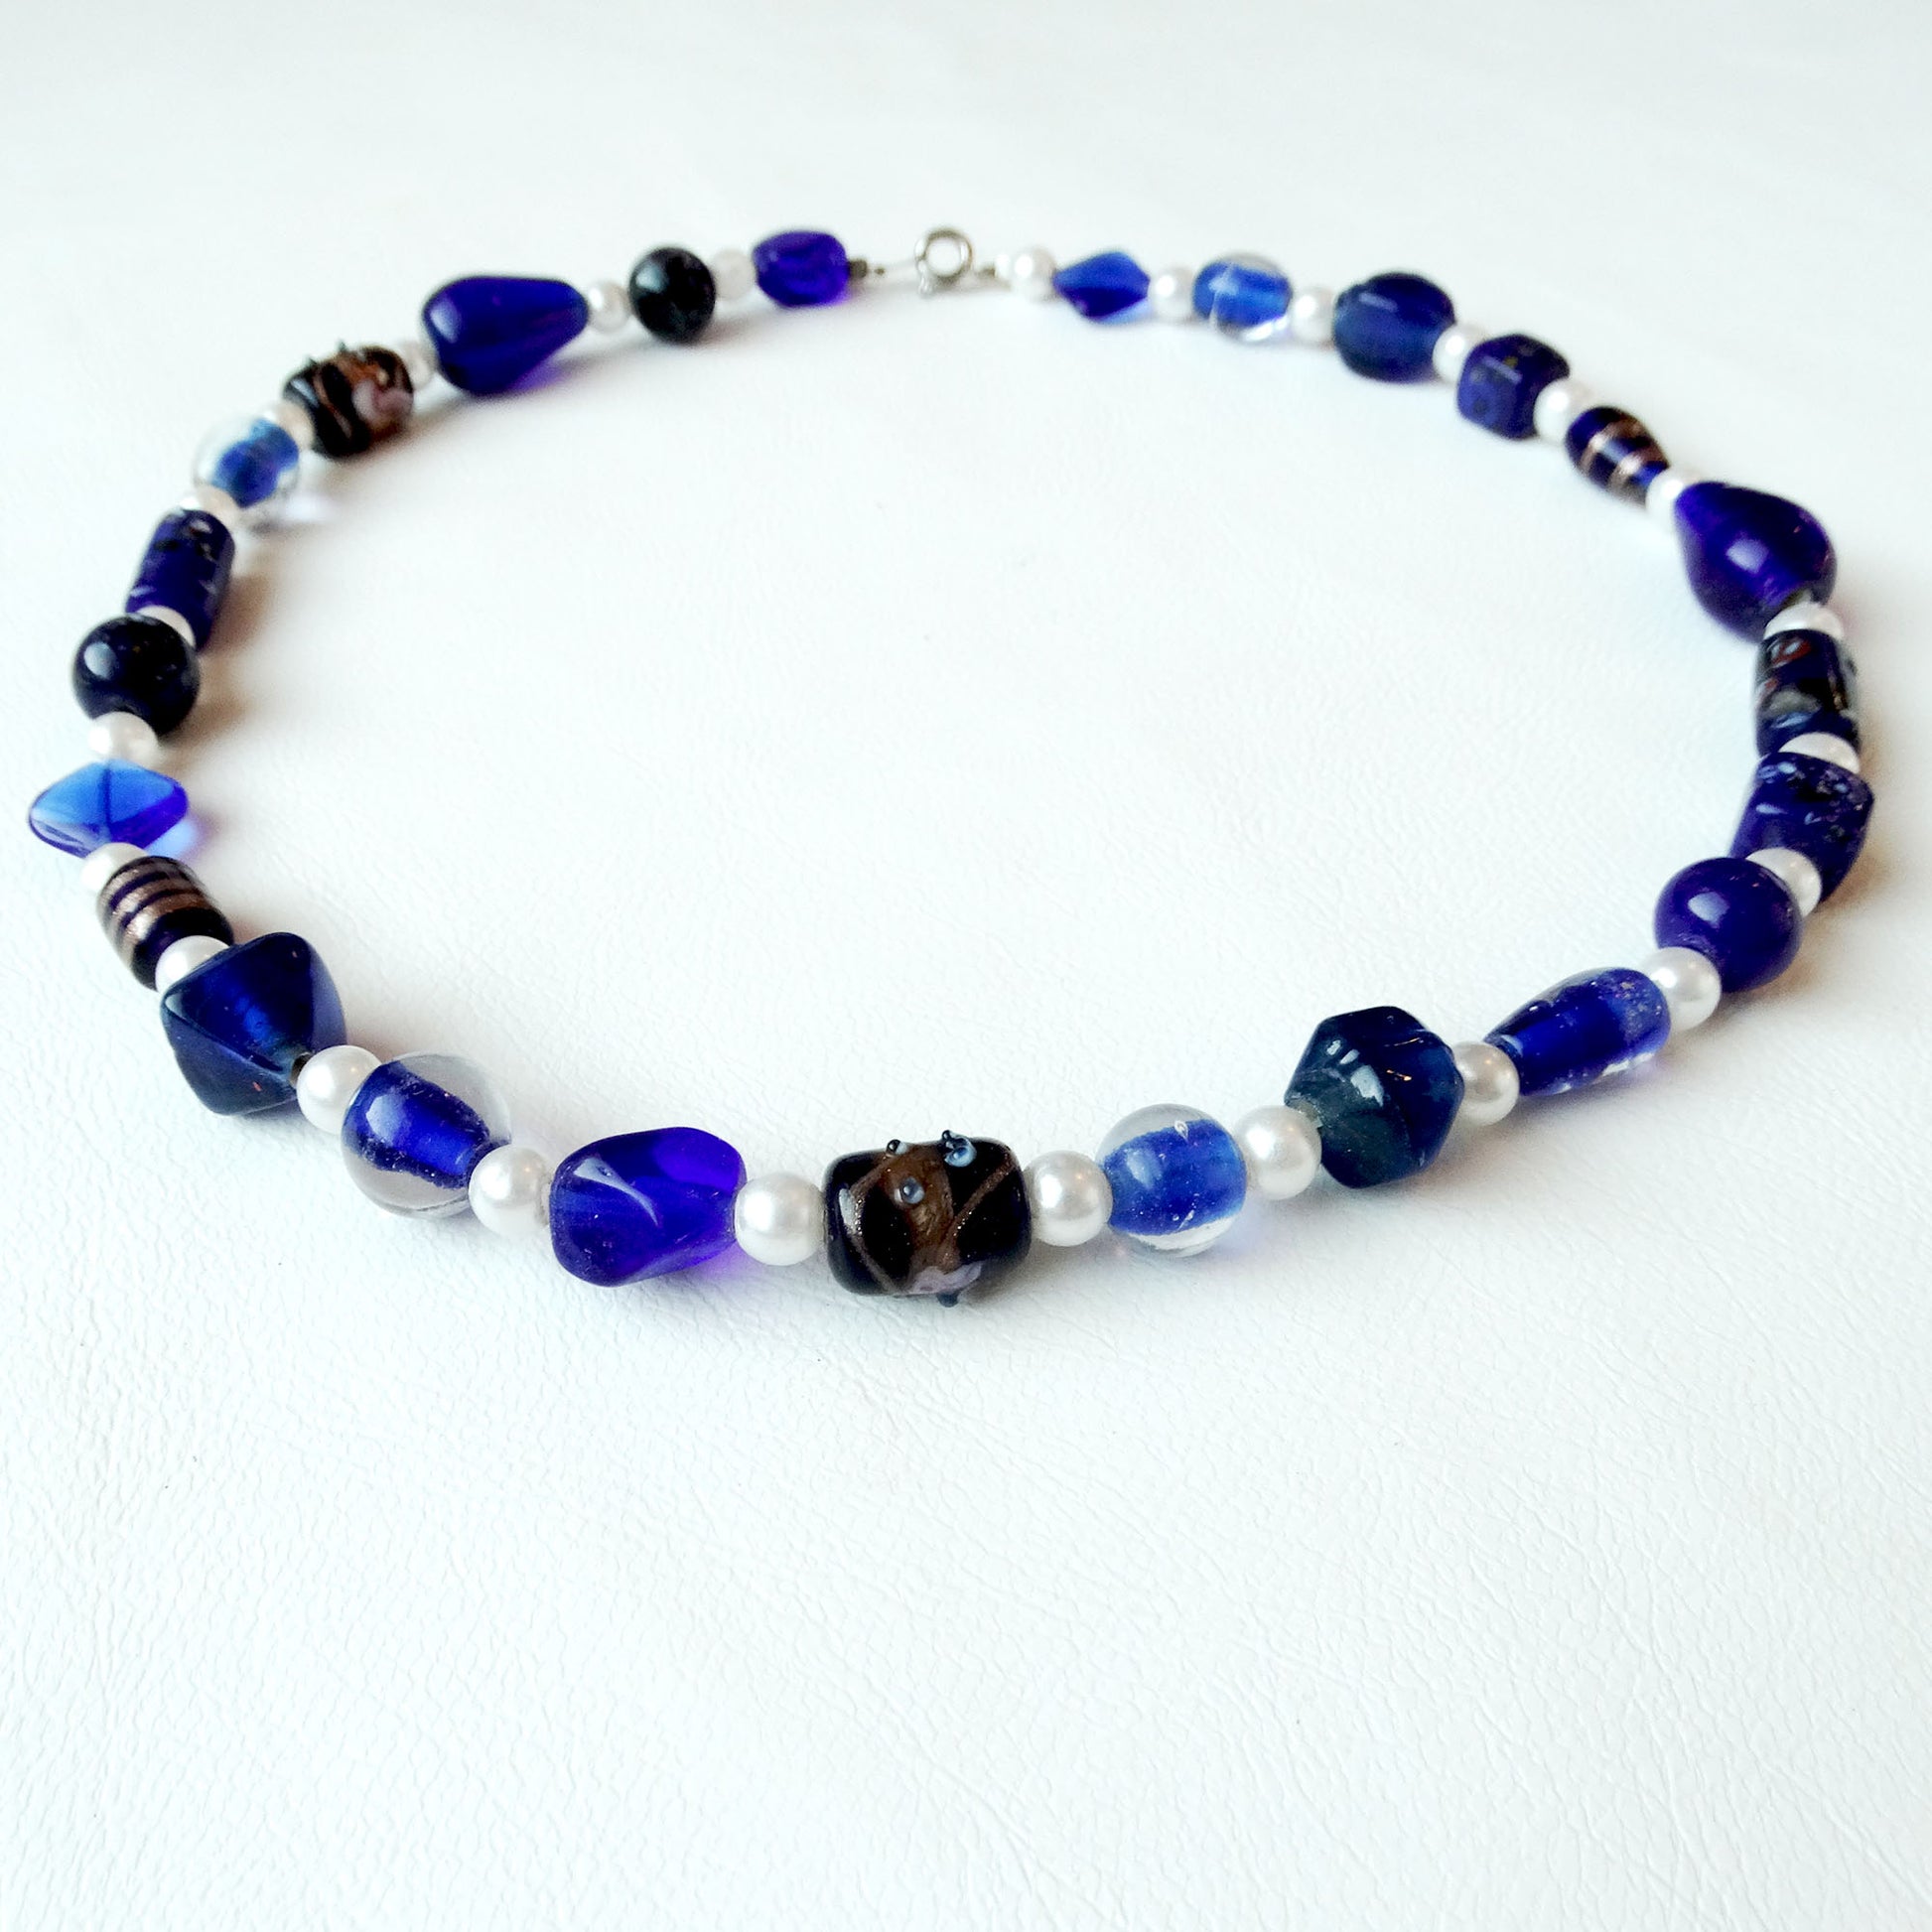 handmade-Cobalt-Blue-Beads-Stones-Pearls-Necklace-17.5-inch